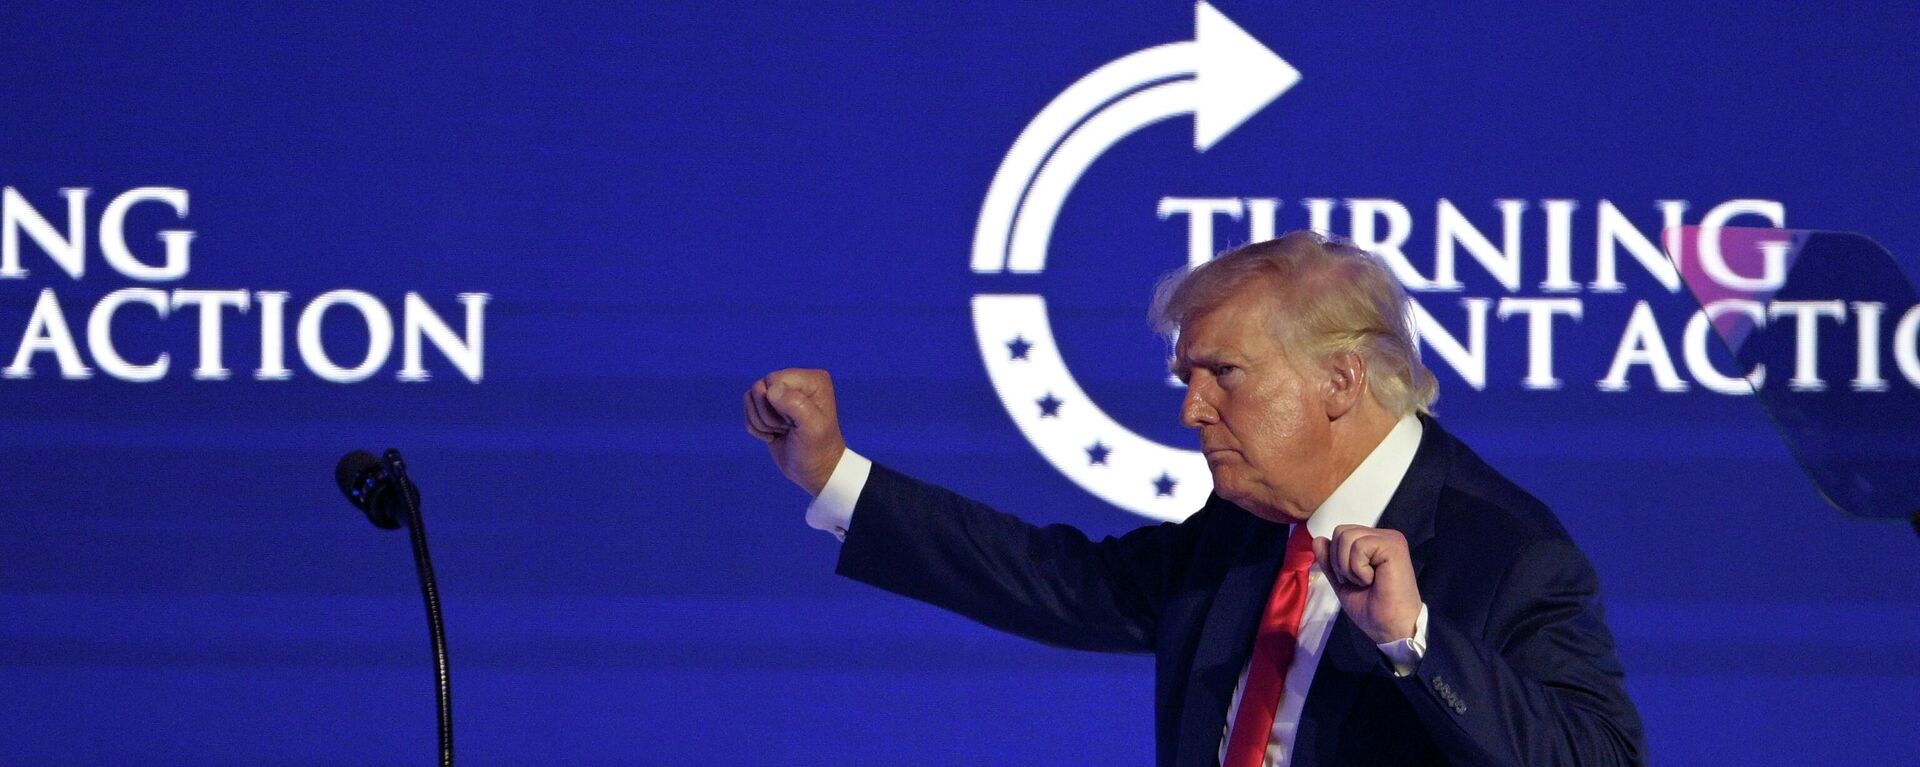 Former President Donald Trump dances on stage after addressing attendees during the Turning Point USA Student Action Summit, Saturday, July 23, 2022, in Tampa, Fla. - Sputnik International, 1920, 04.01.2023